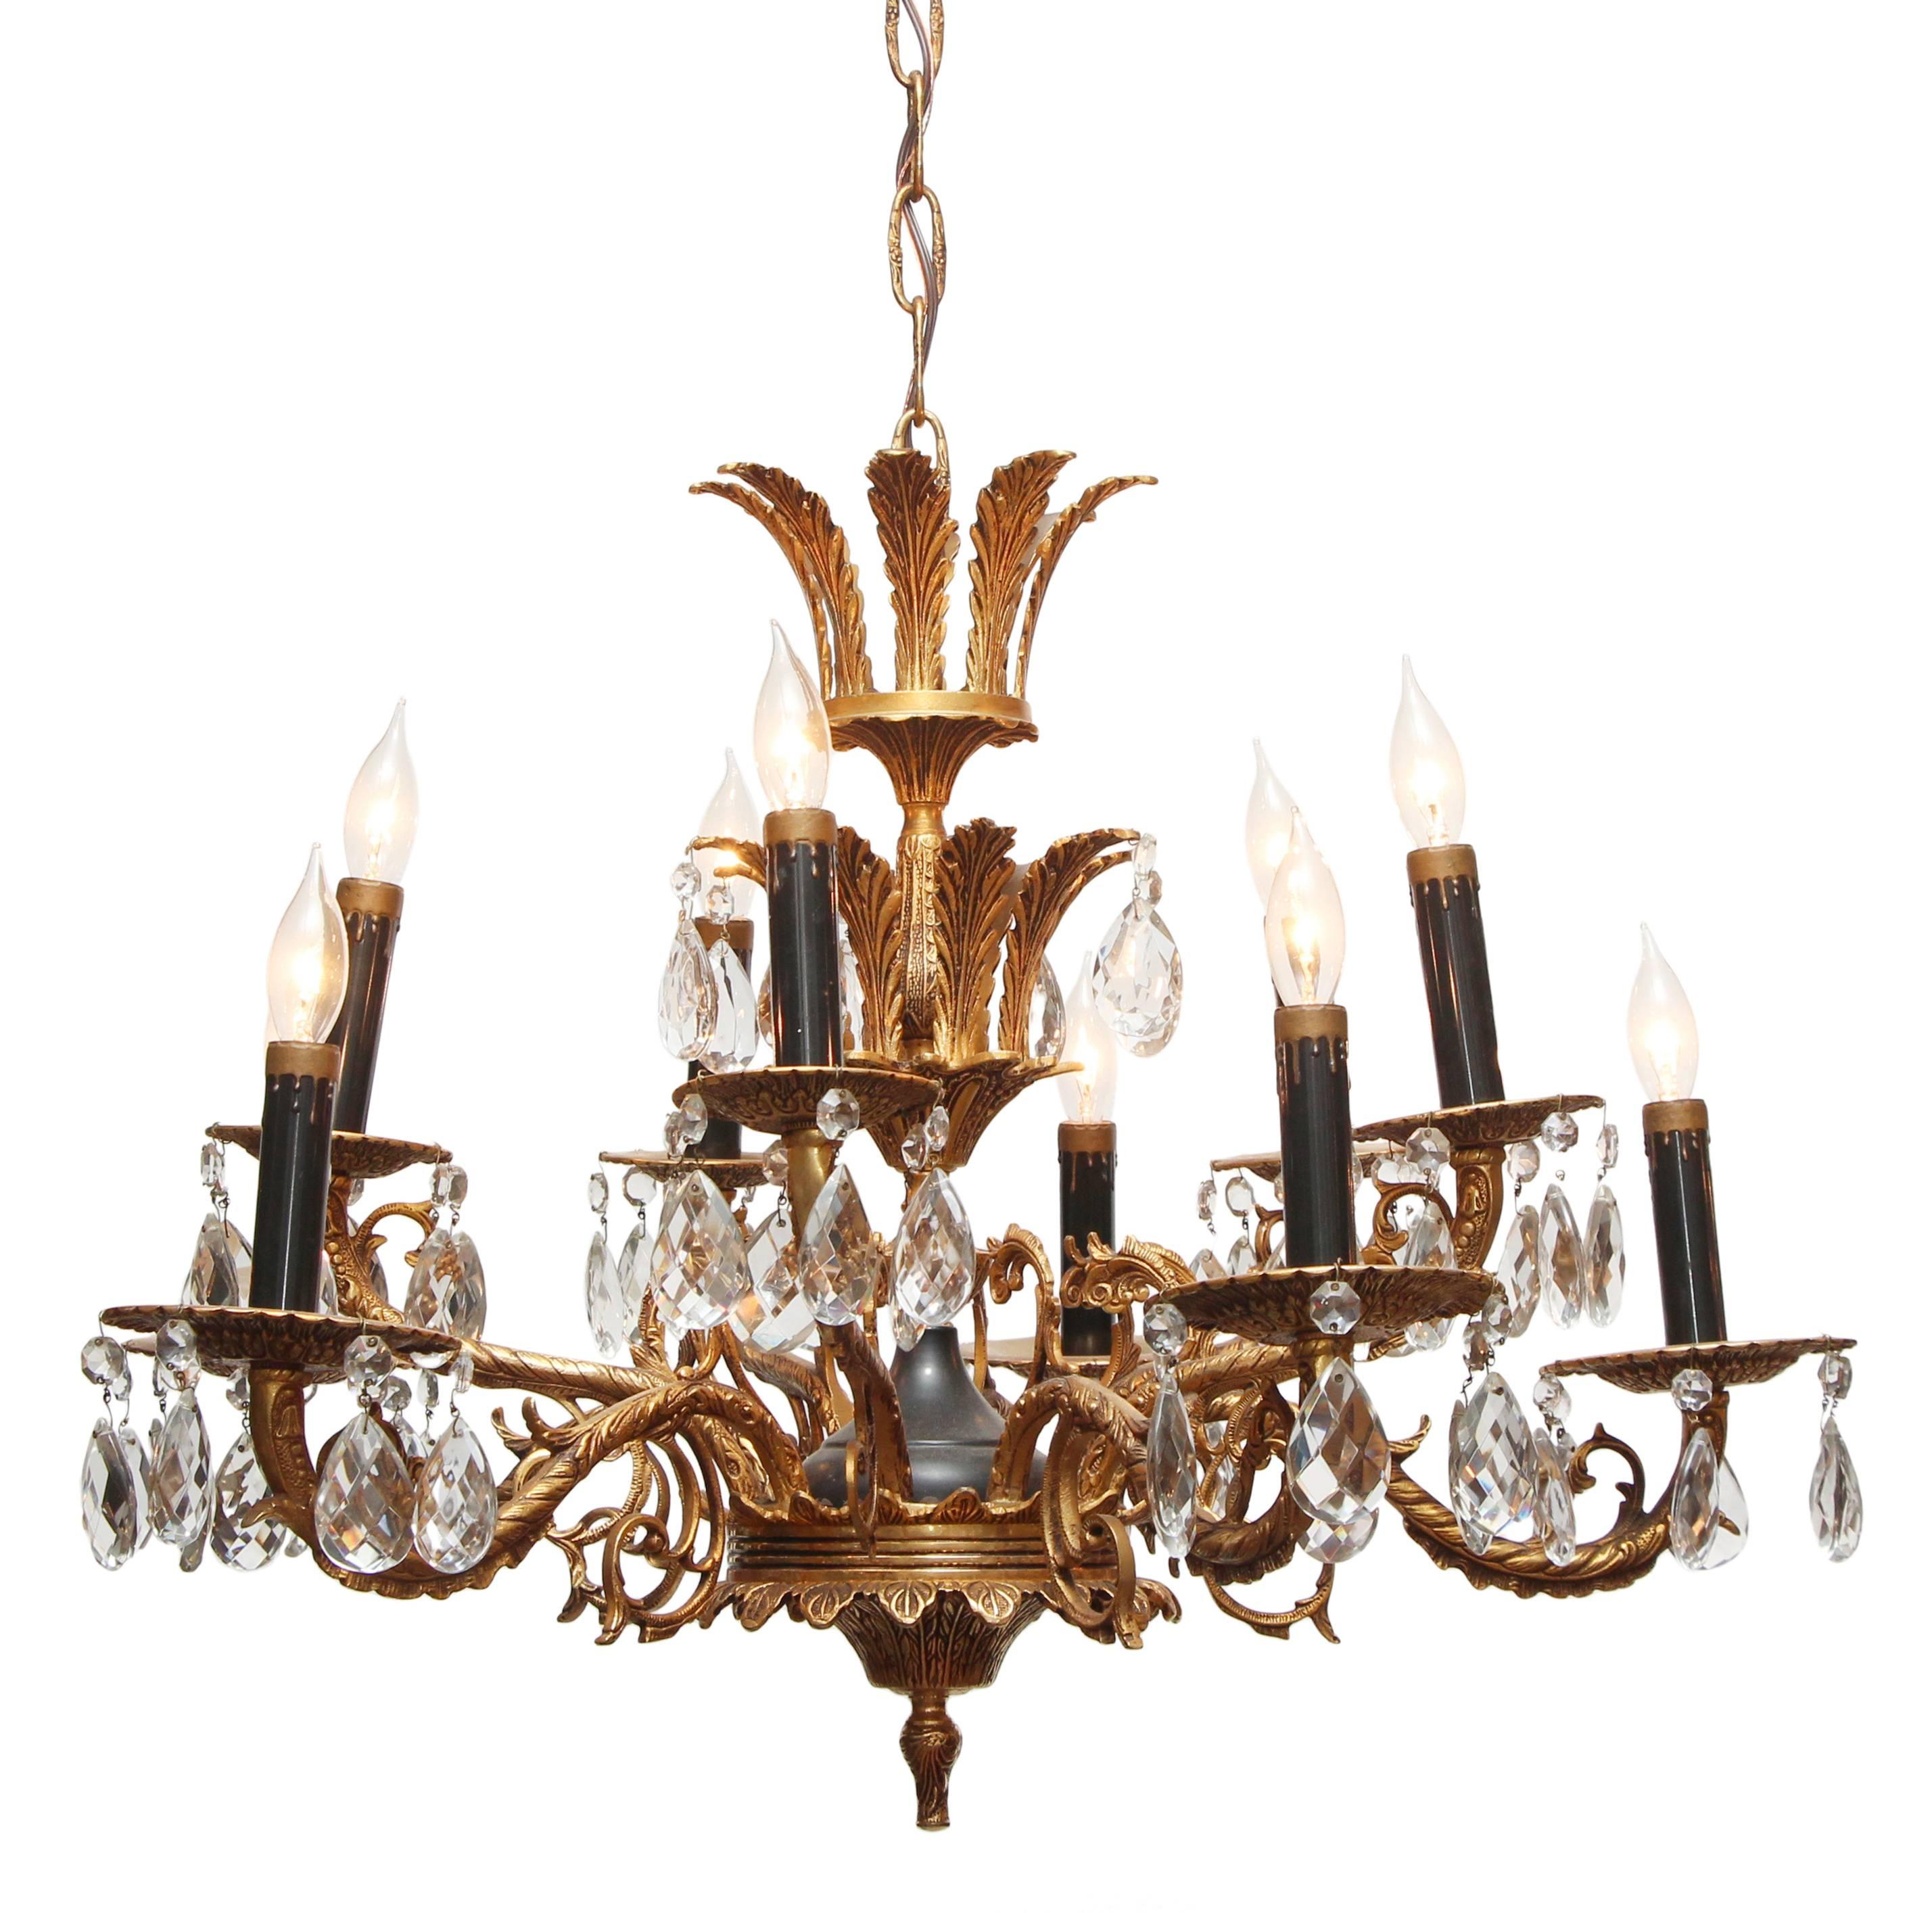 1940s Ten-Light Ornate Crystal Chandelier with Acanthus Leaves